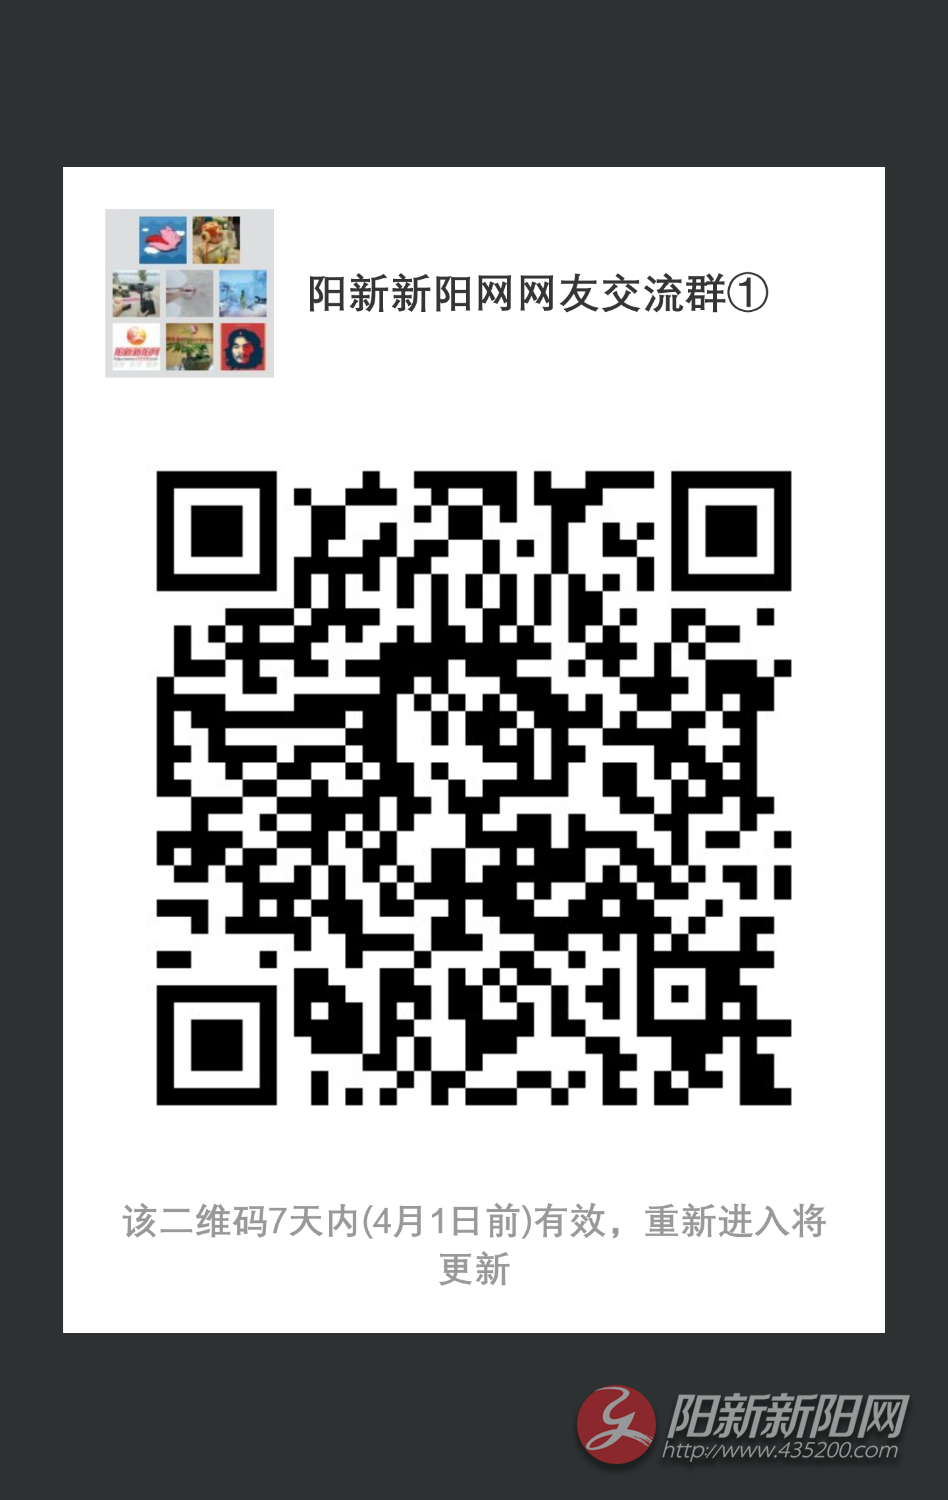 mmqrcode1521962673036.png